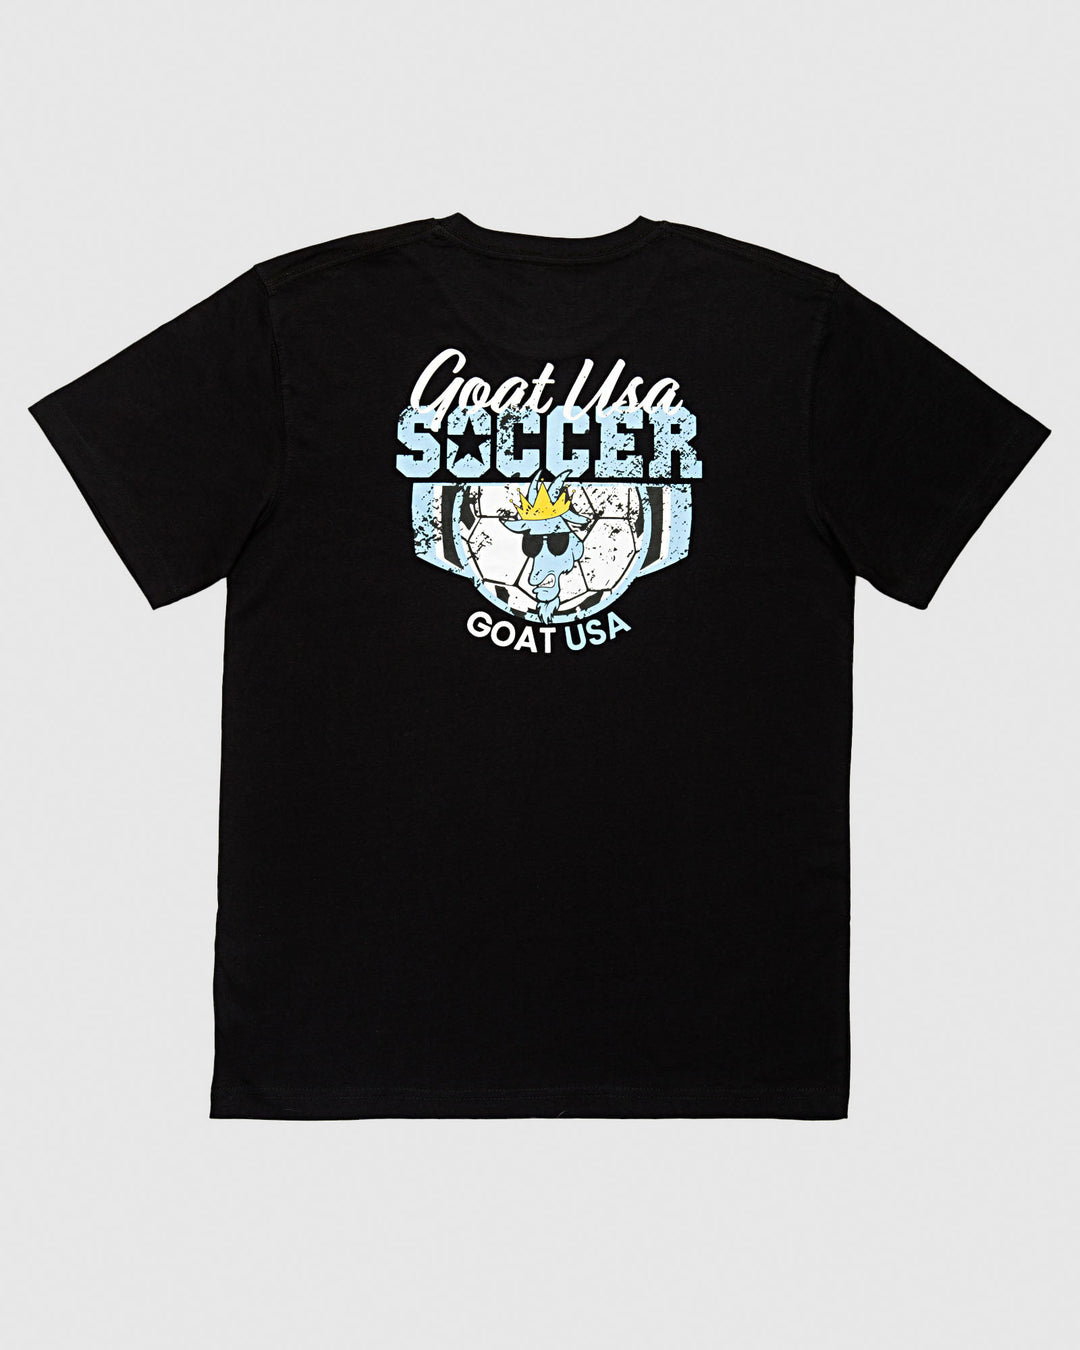 back of black t-shirt with soccer design that reads "GOAT USA SOCCER"